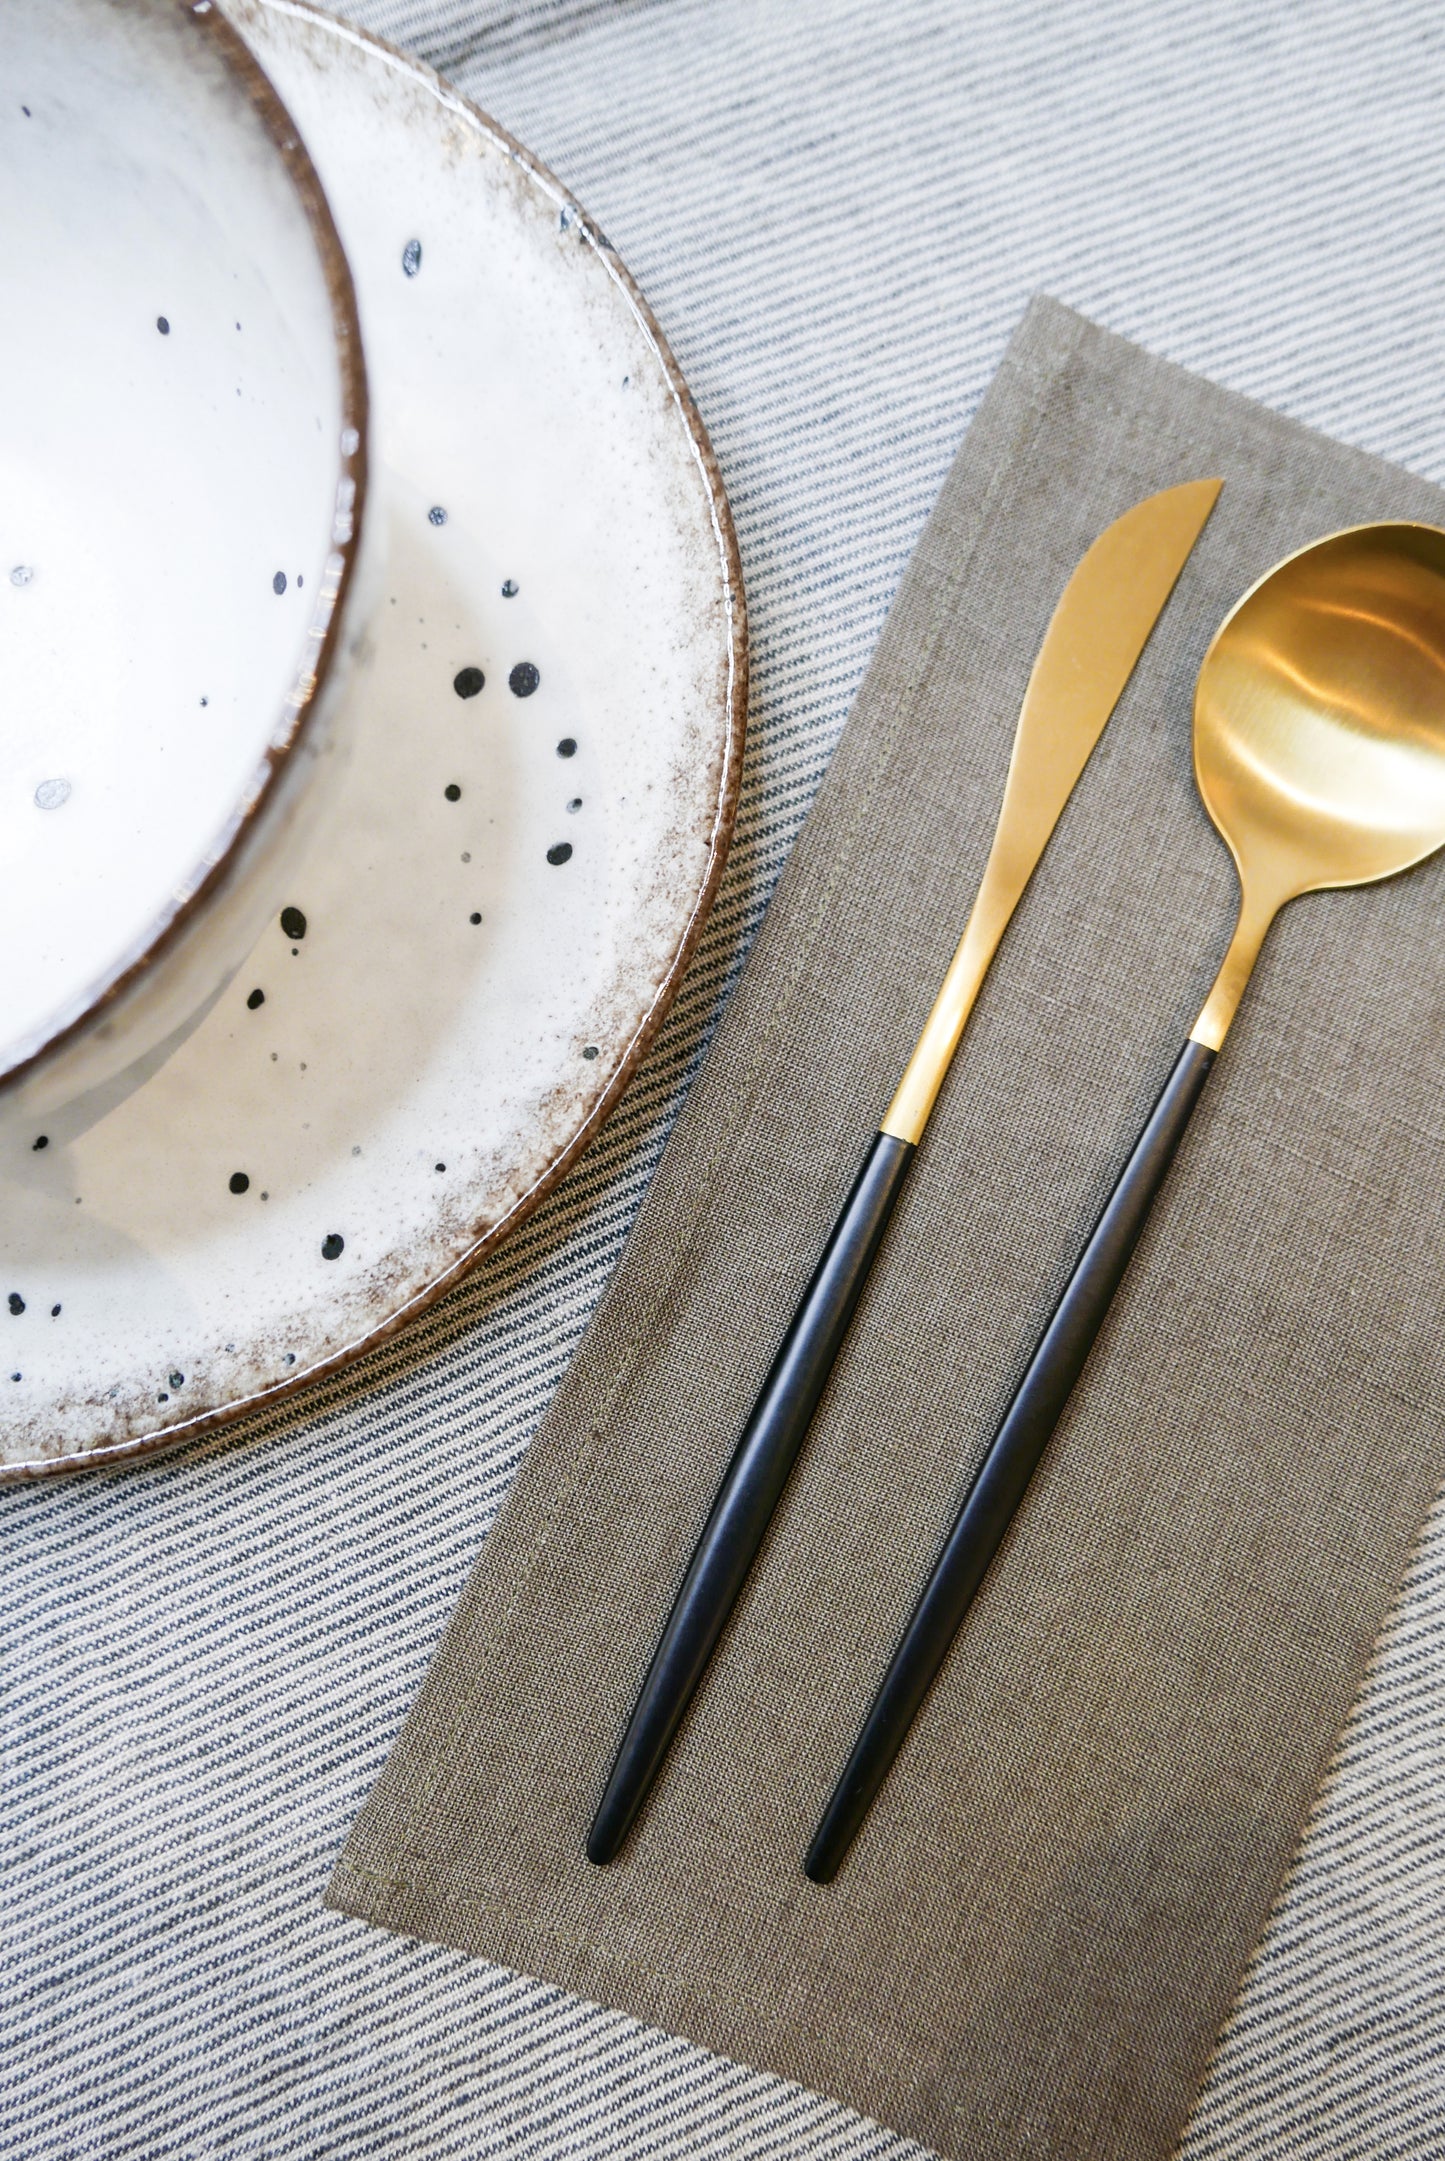 table setting with grey striped table cloth, brown napkin, black and gold cutlery and white and brown speckled plate and bowl